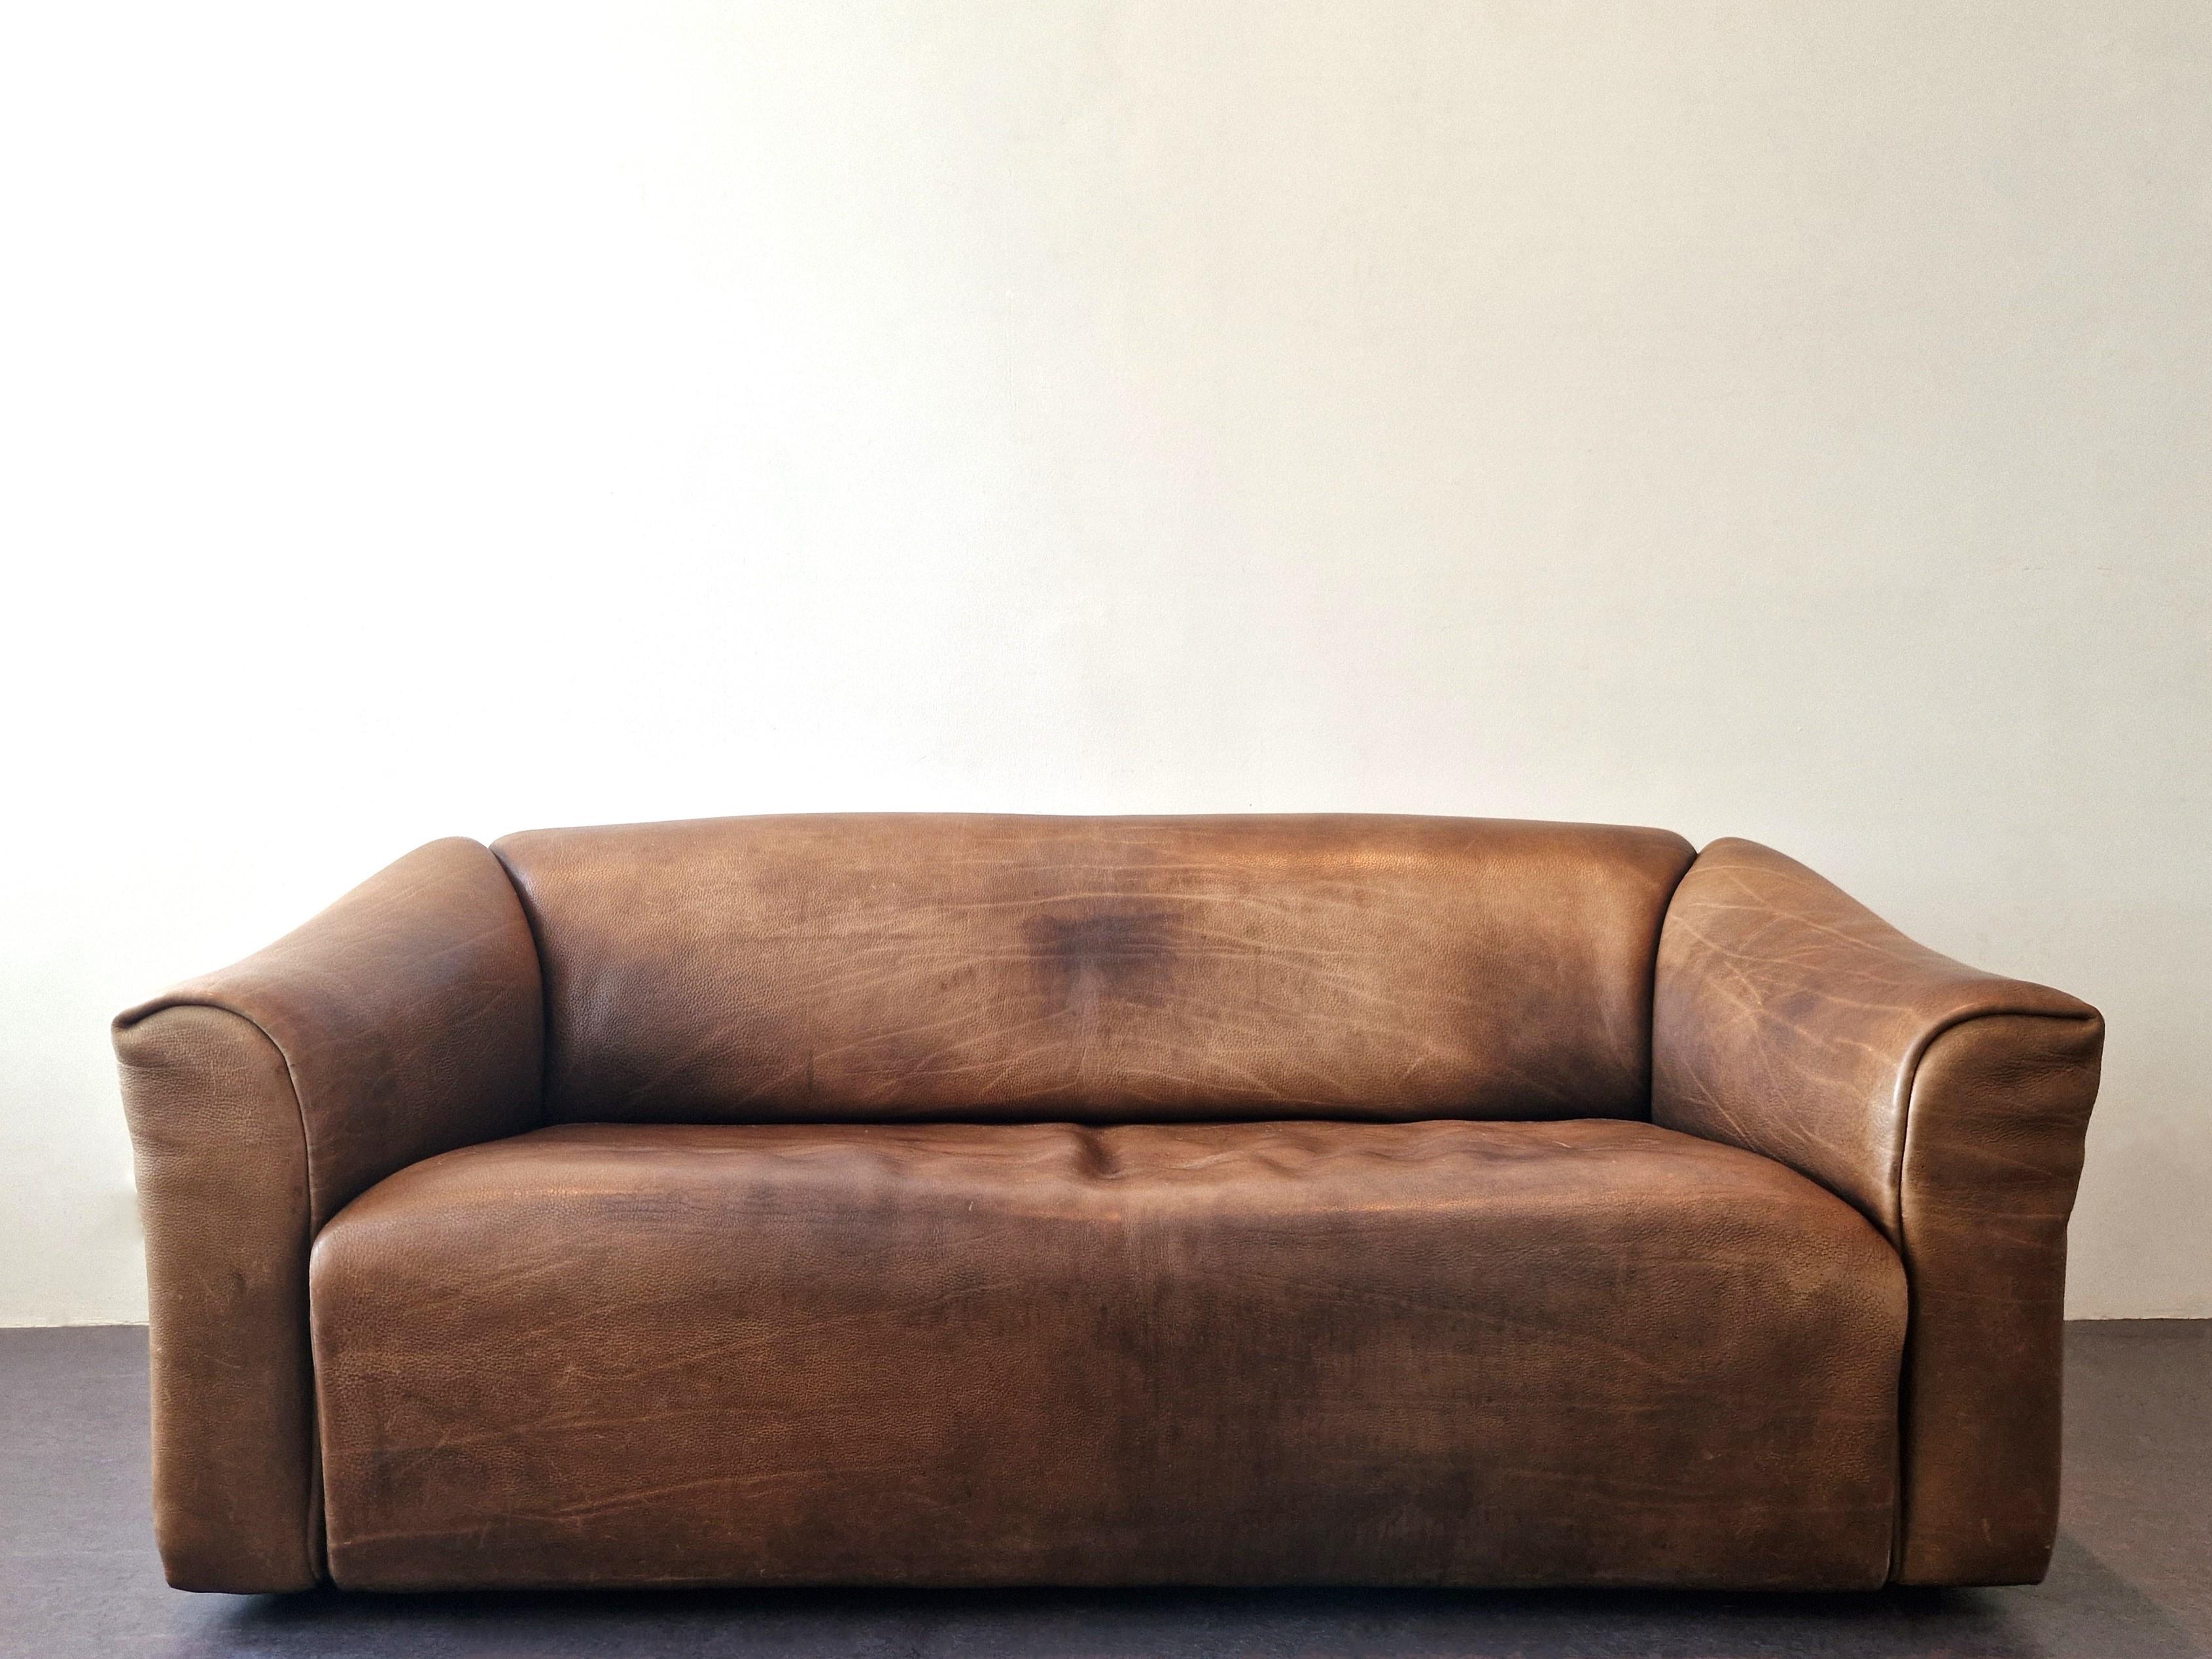 This DS-47 three-seater sofa was made by De Sede, in the 1970's in Switzerland. It is made of (5mm) thick brown Neck leather that is laid on in one piece from the outside and working inward. The sofa has an extendable seat depth for high seating